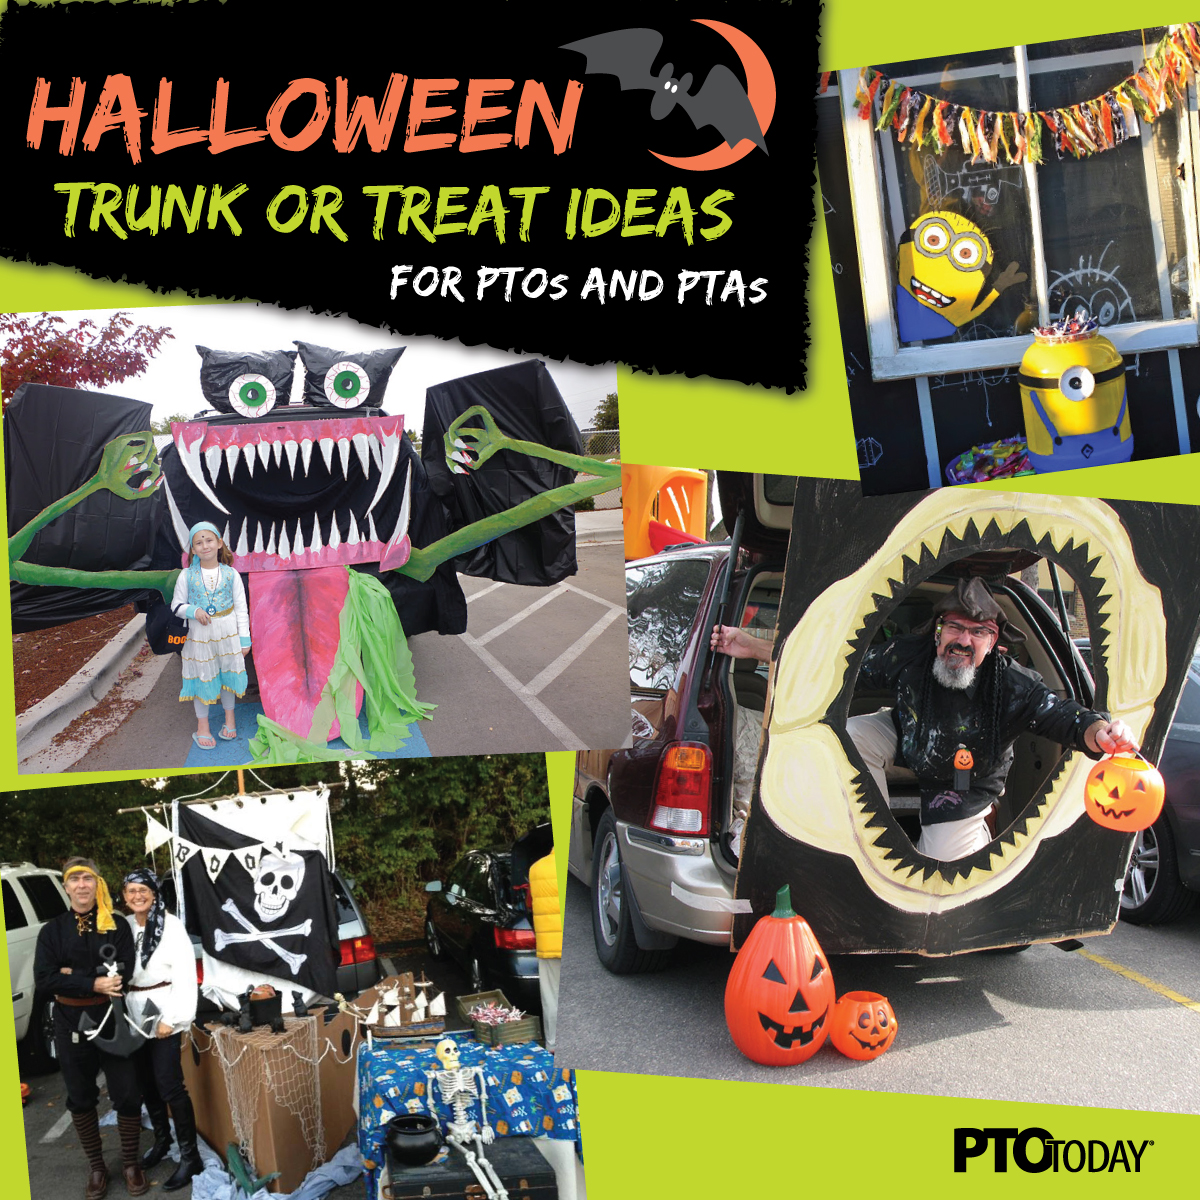 How To Organize a Trunk or Treat - pin this article